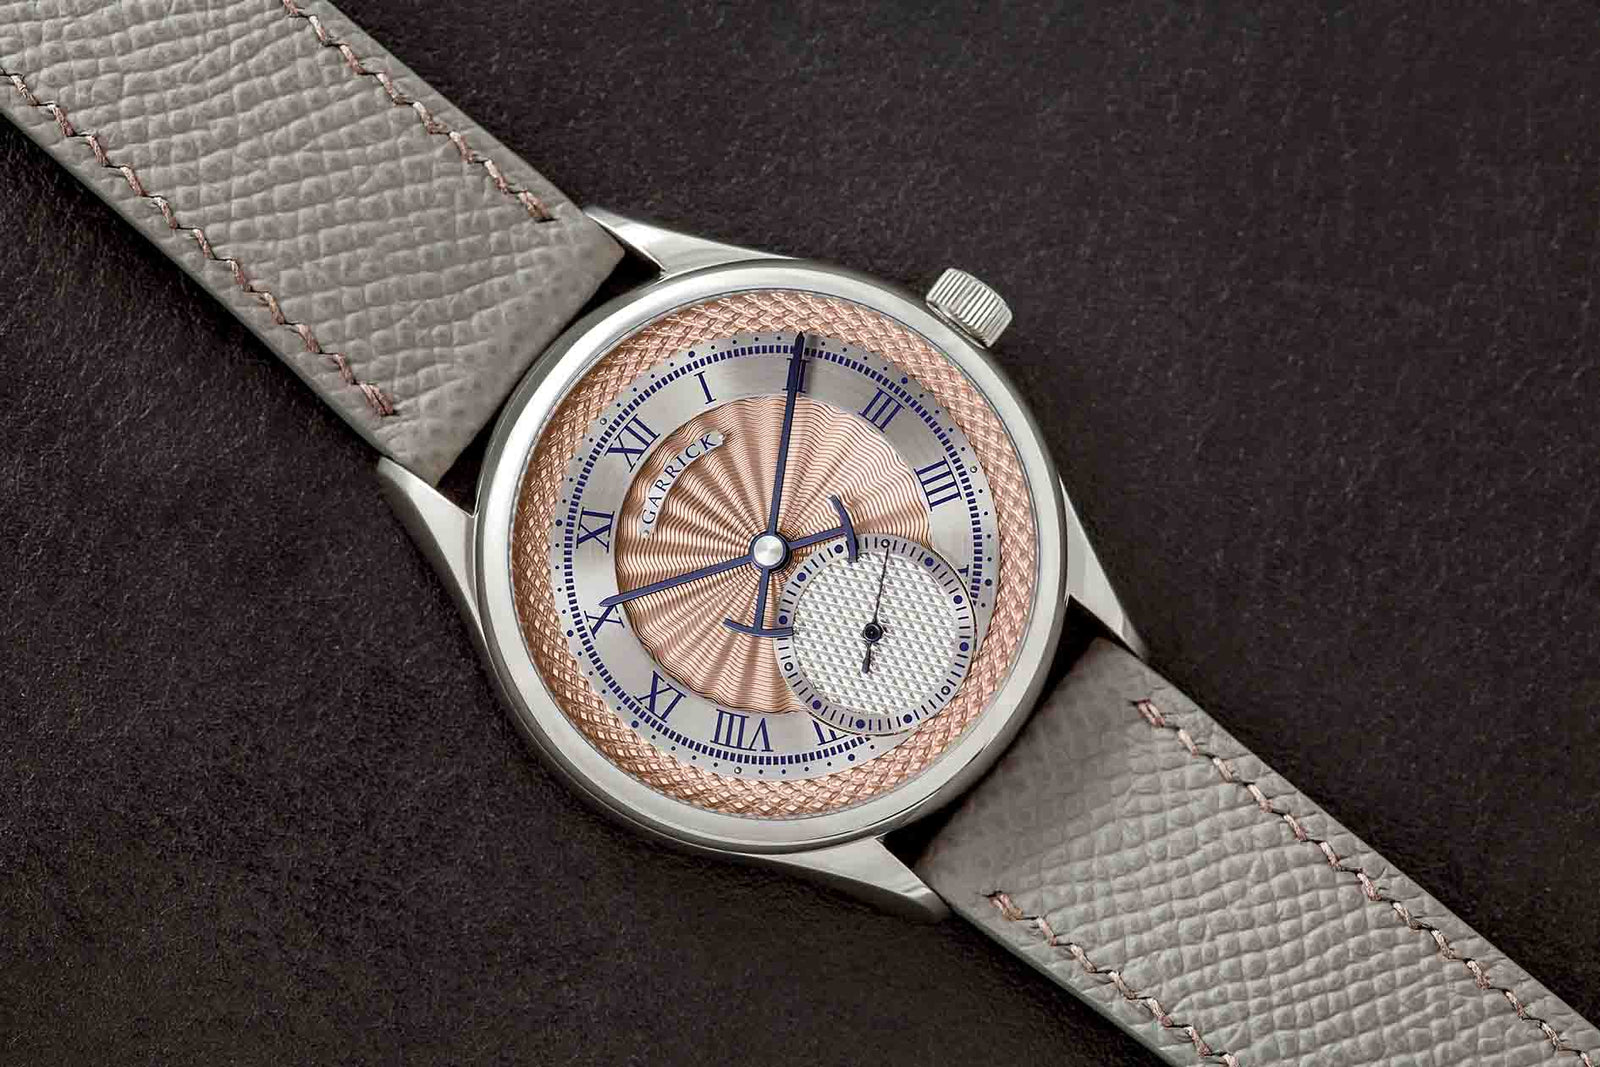 English made S7 watch with pink gold guilloche dial by Garrick Watchmakers